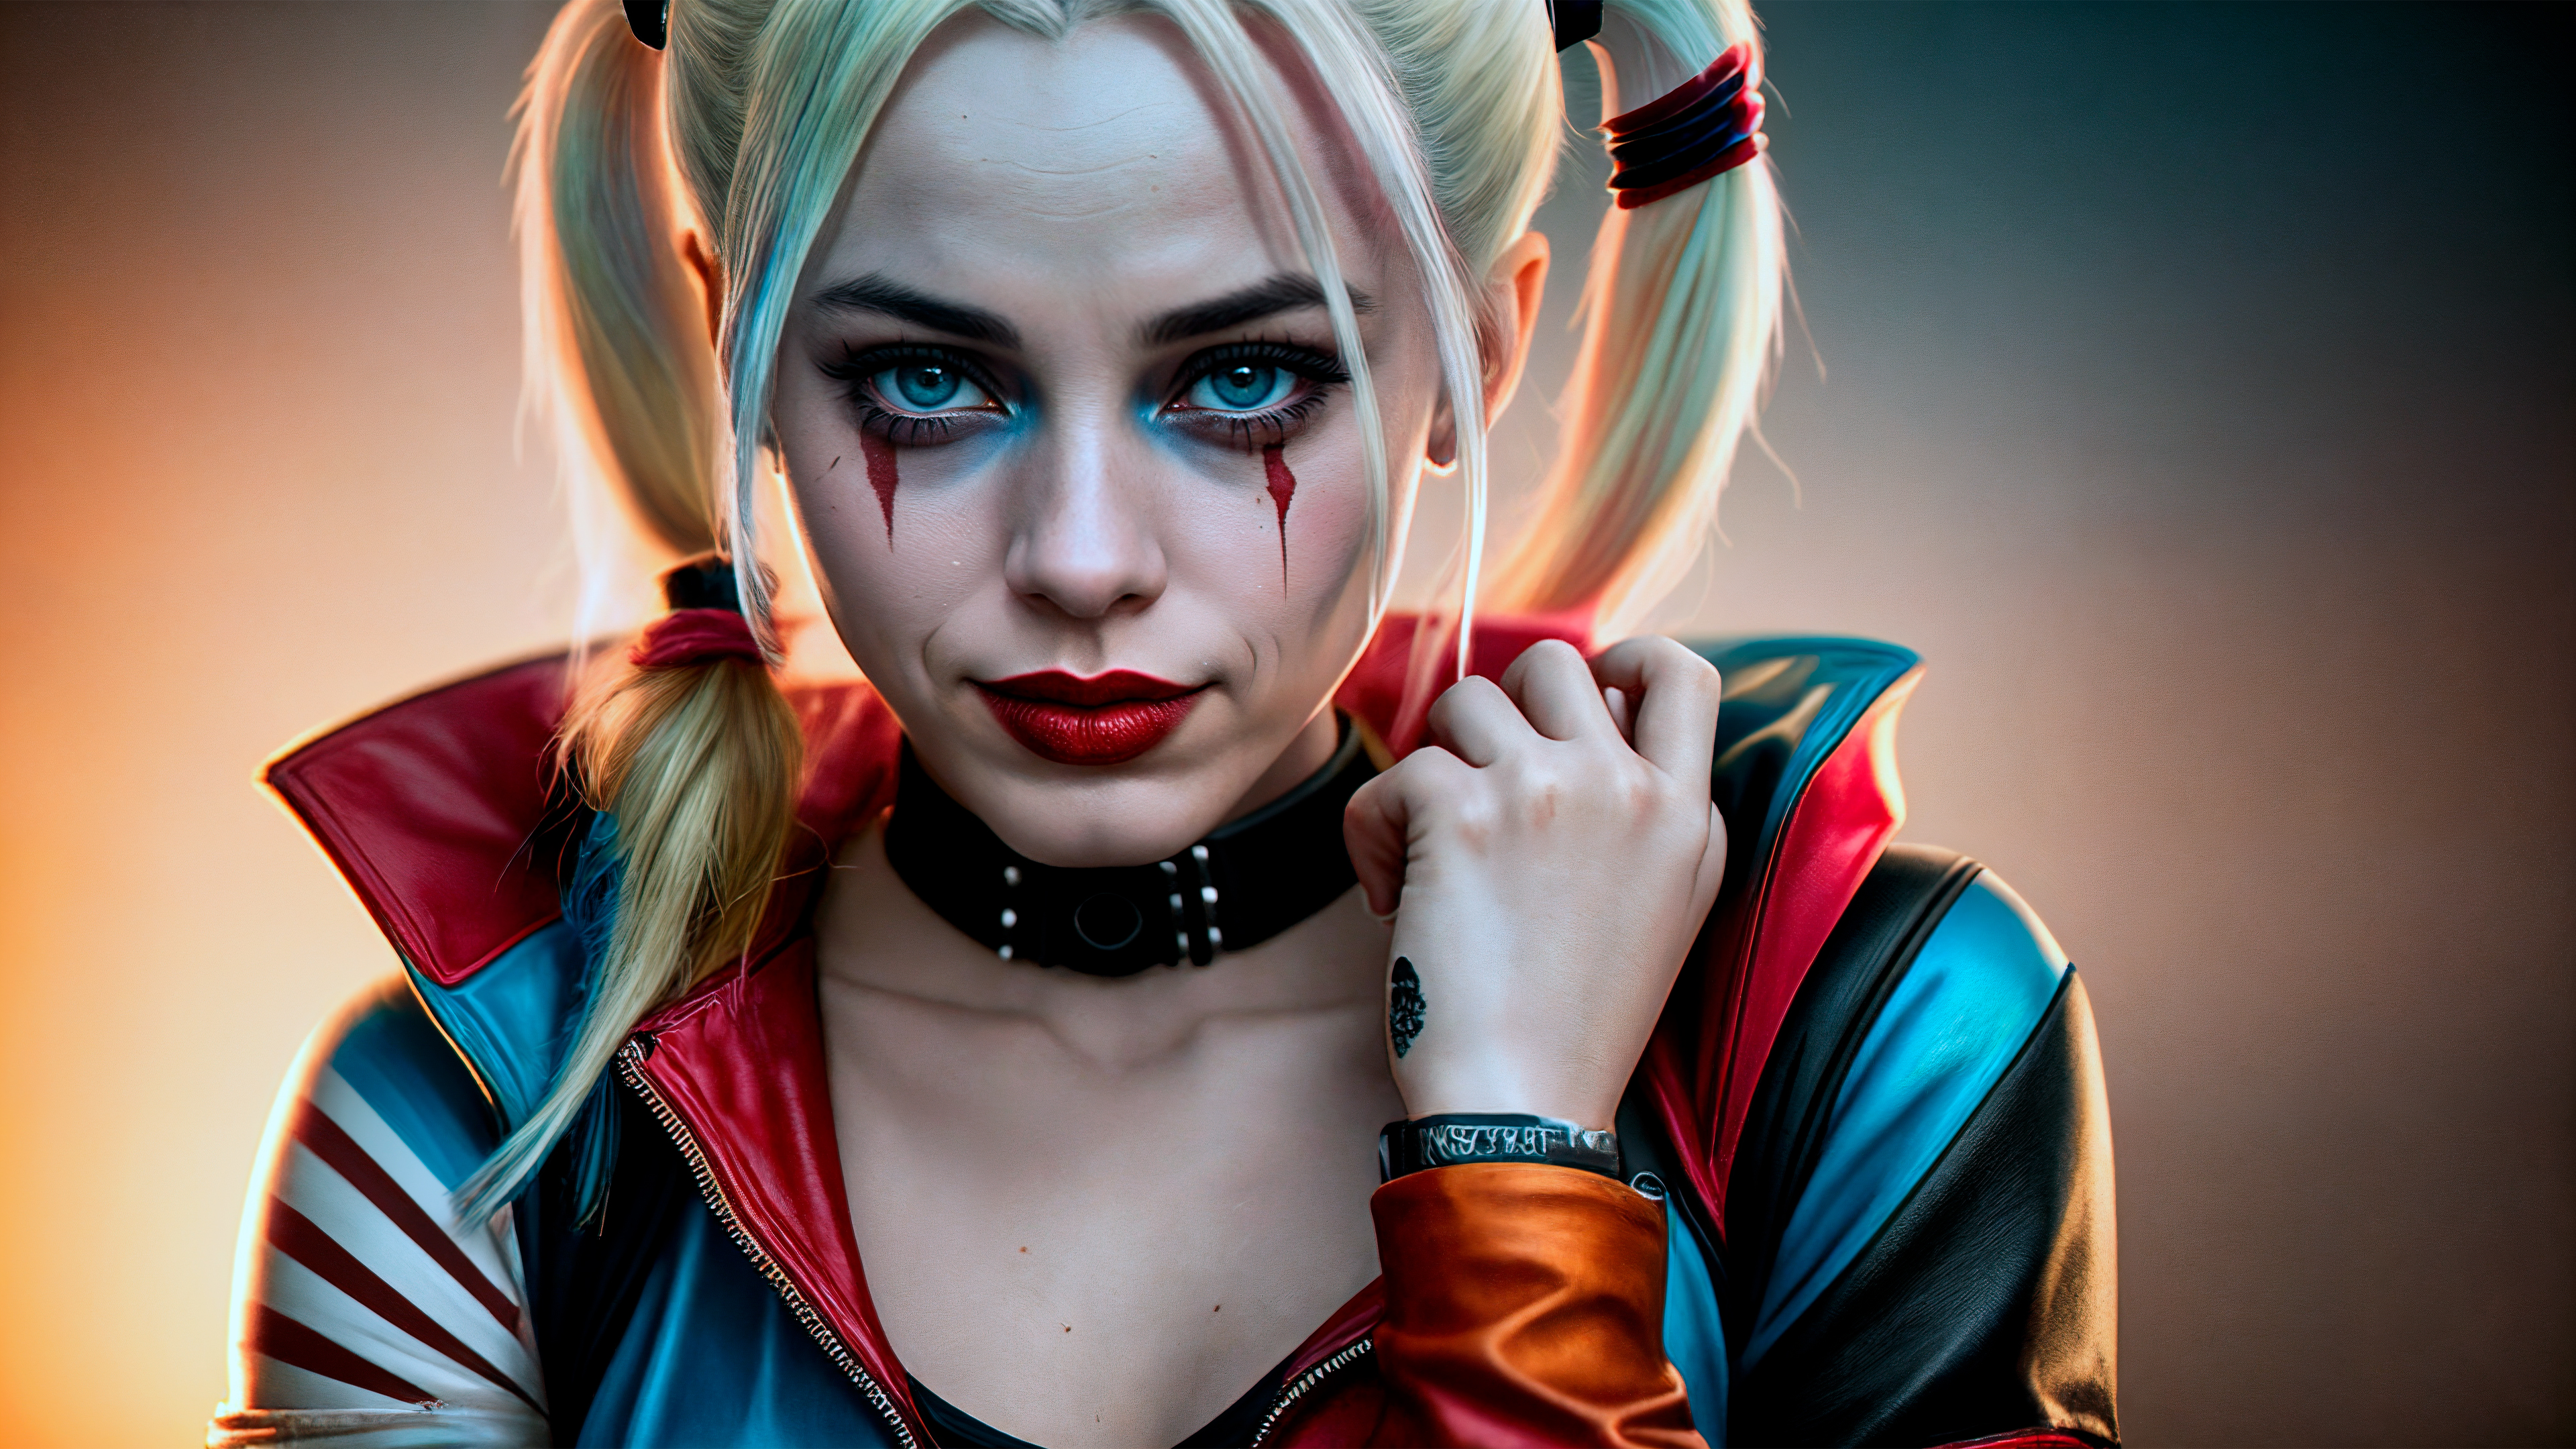 Harley 4K wallpapers for your desktop or mobile screen free and easy to  download